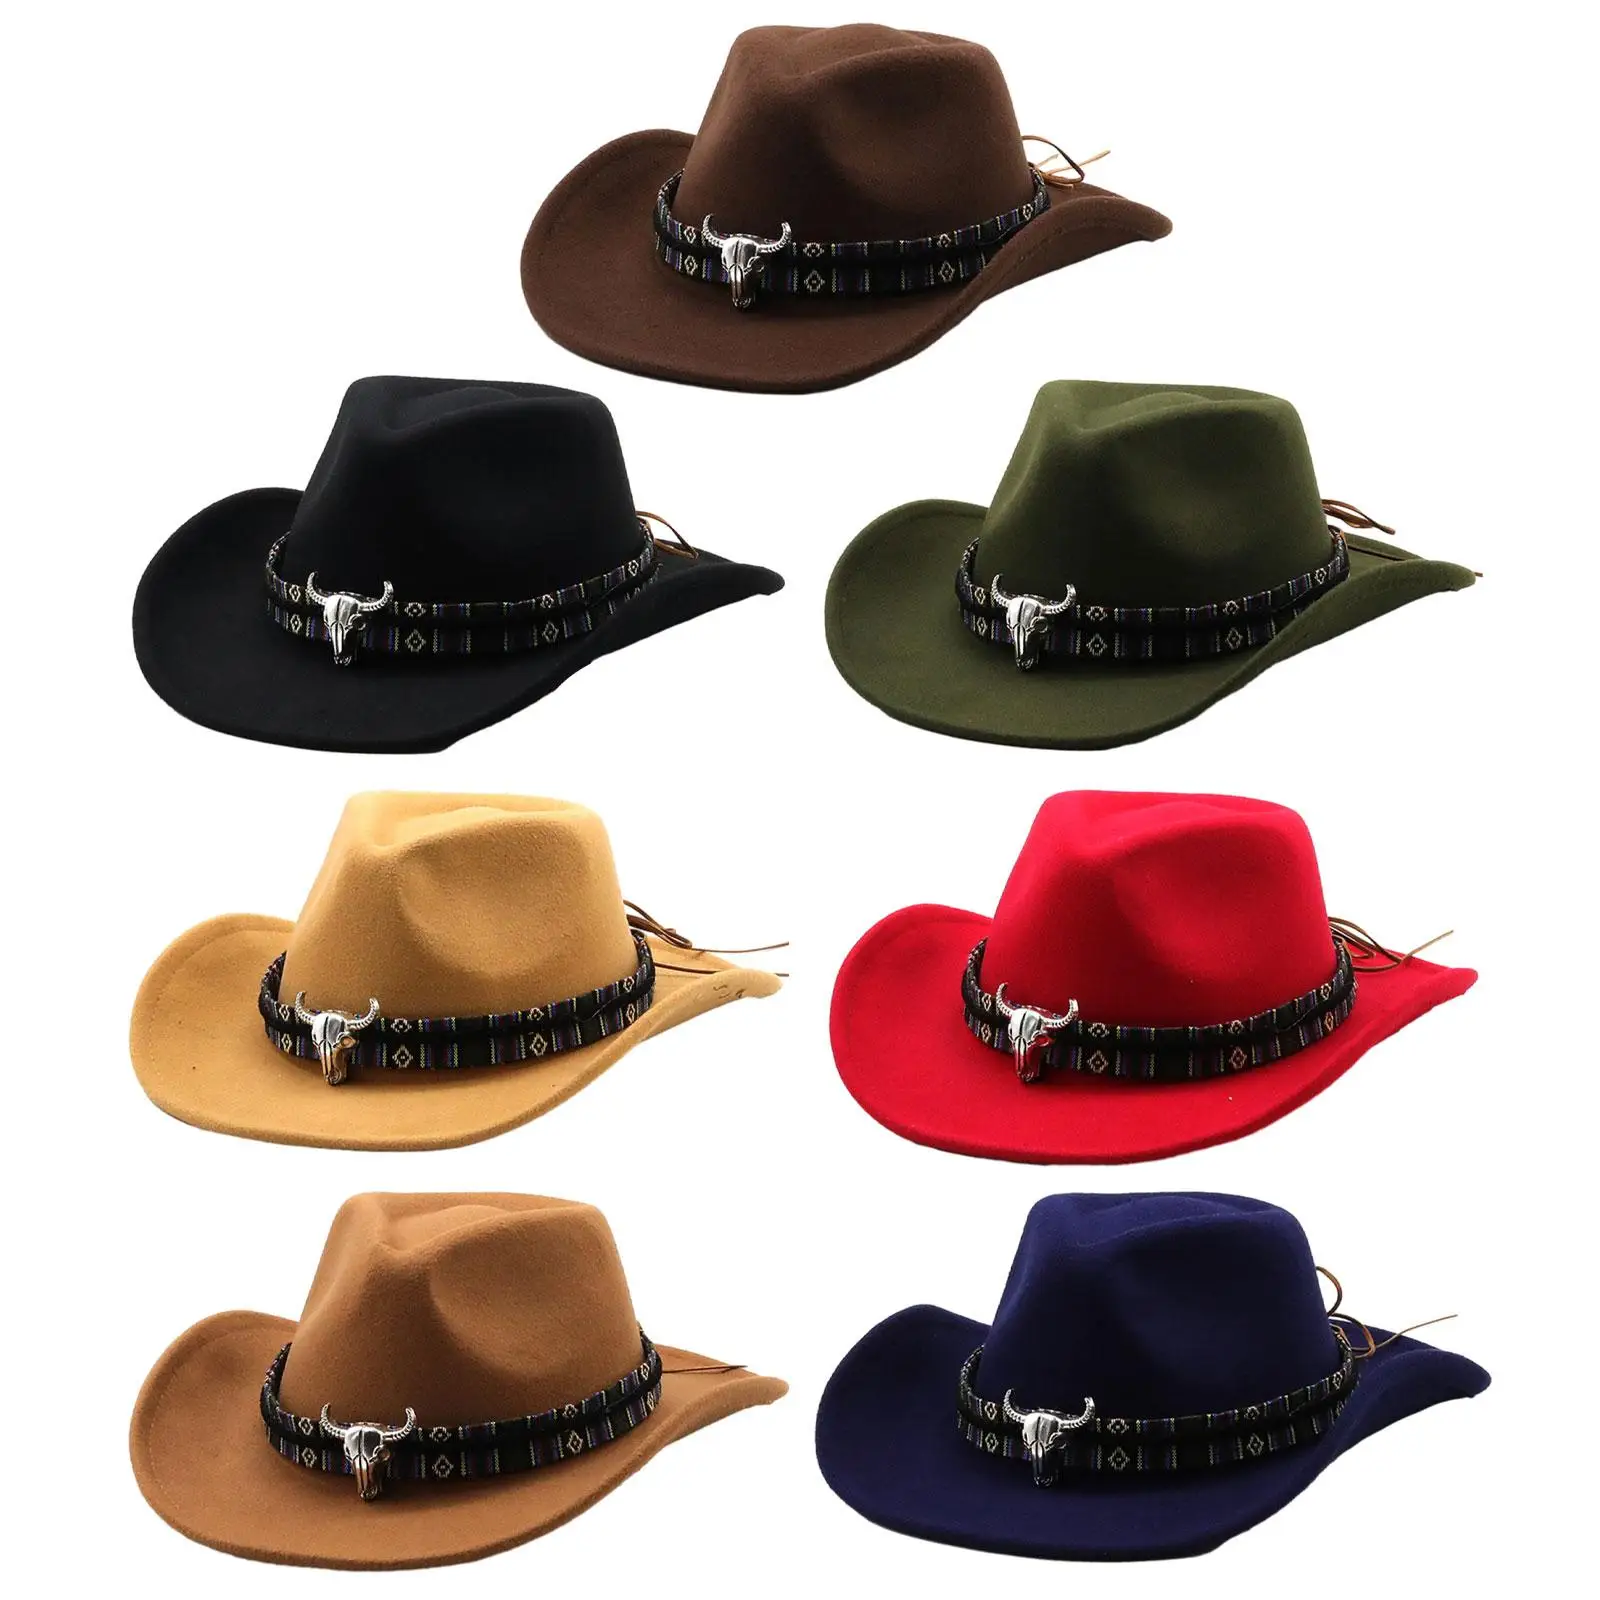 Cowboy Hat Cosplay Casual Lightweight Autumn Stylish Summer Outdoor Sunshade Hat for Camping Street Shopping Hiking Travel